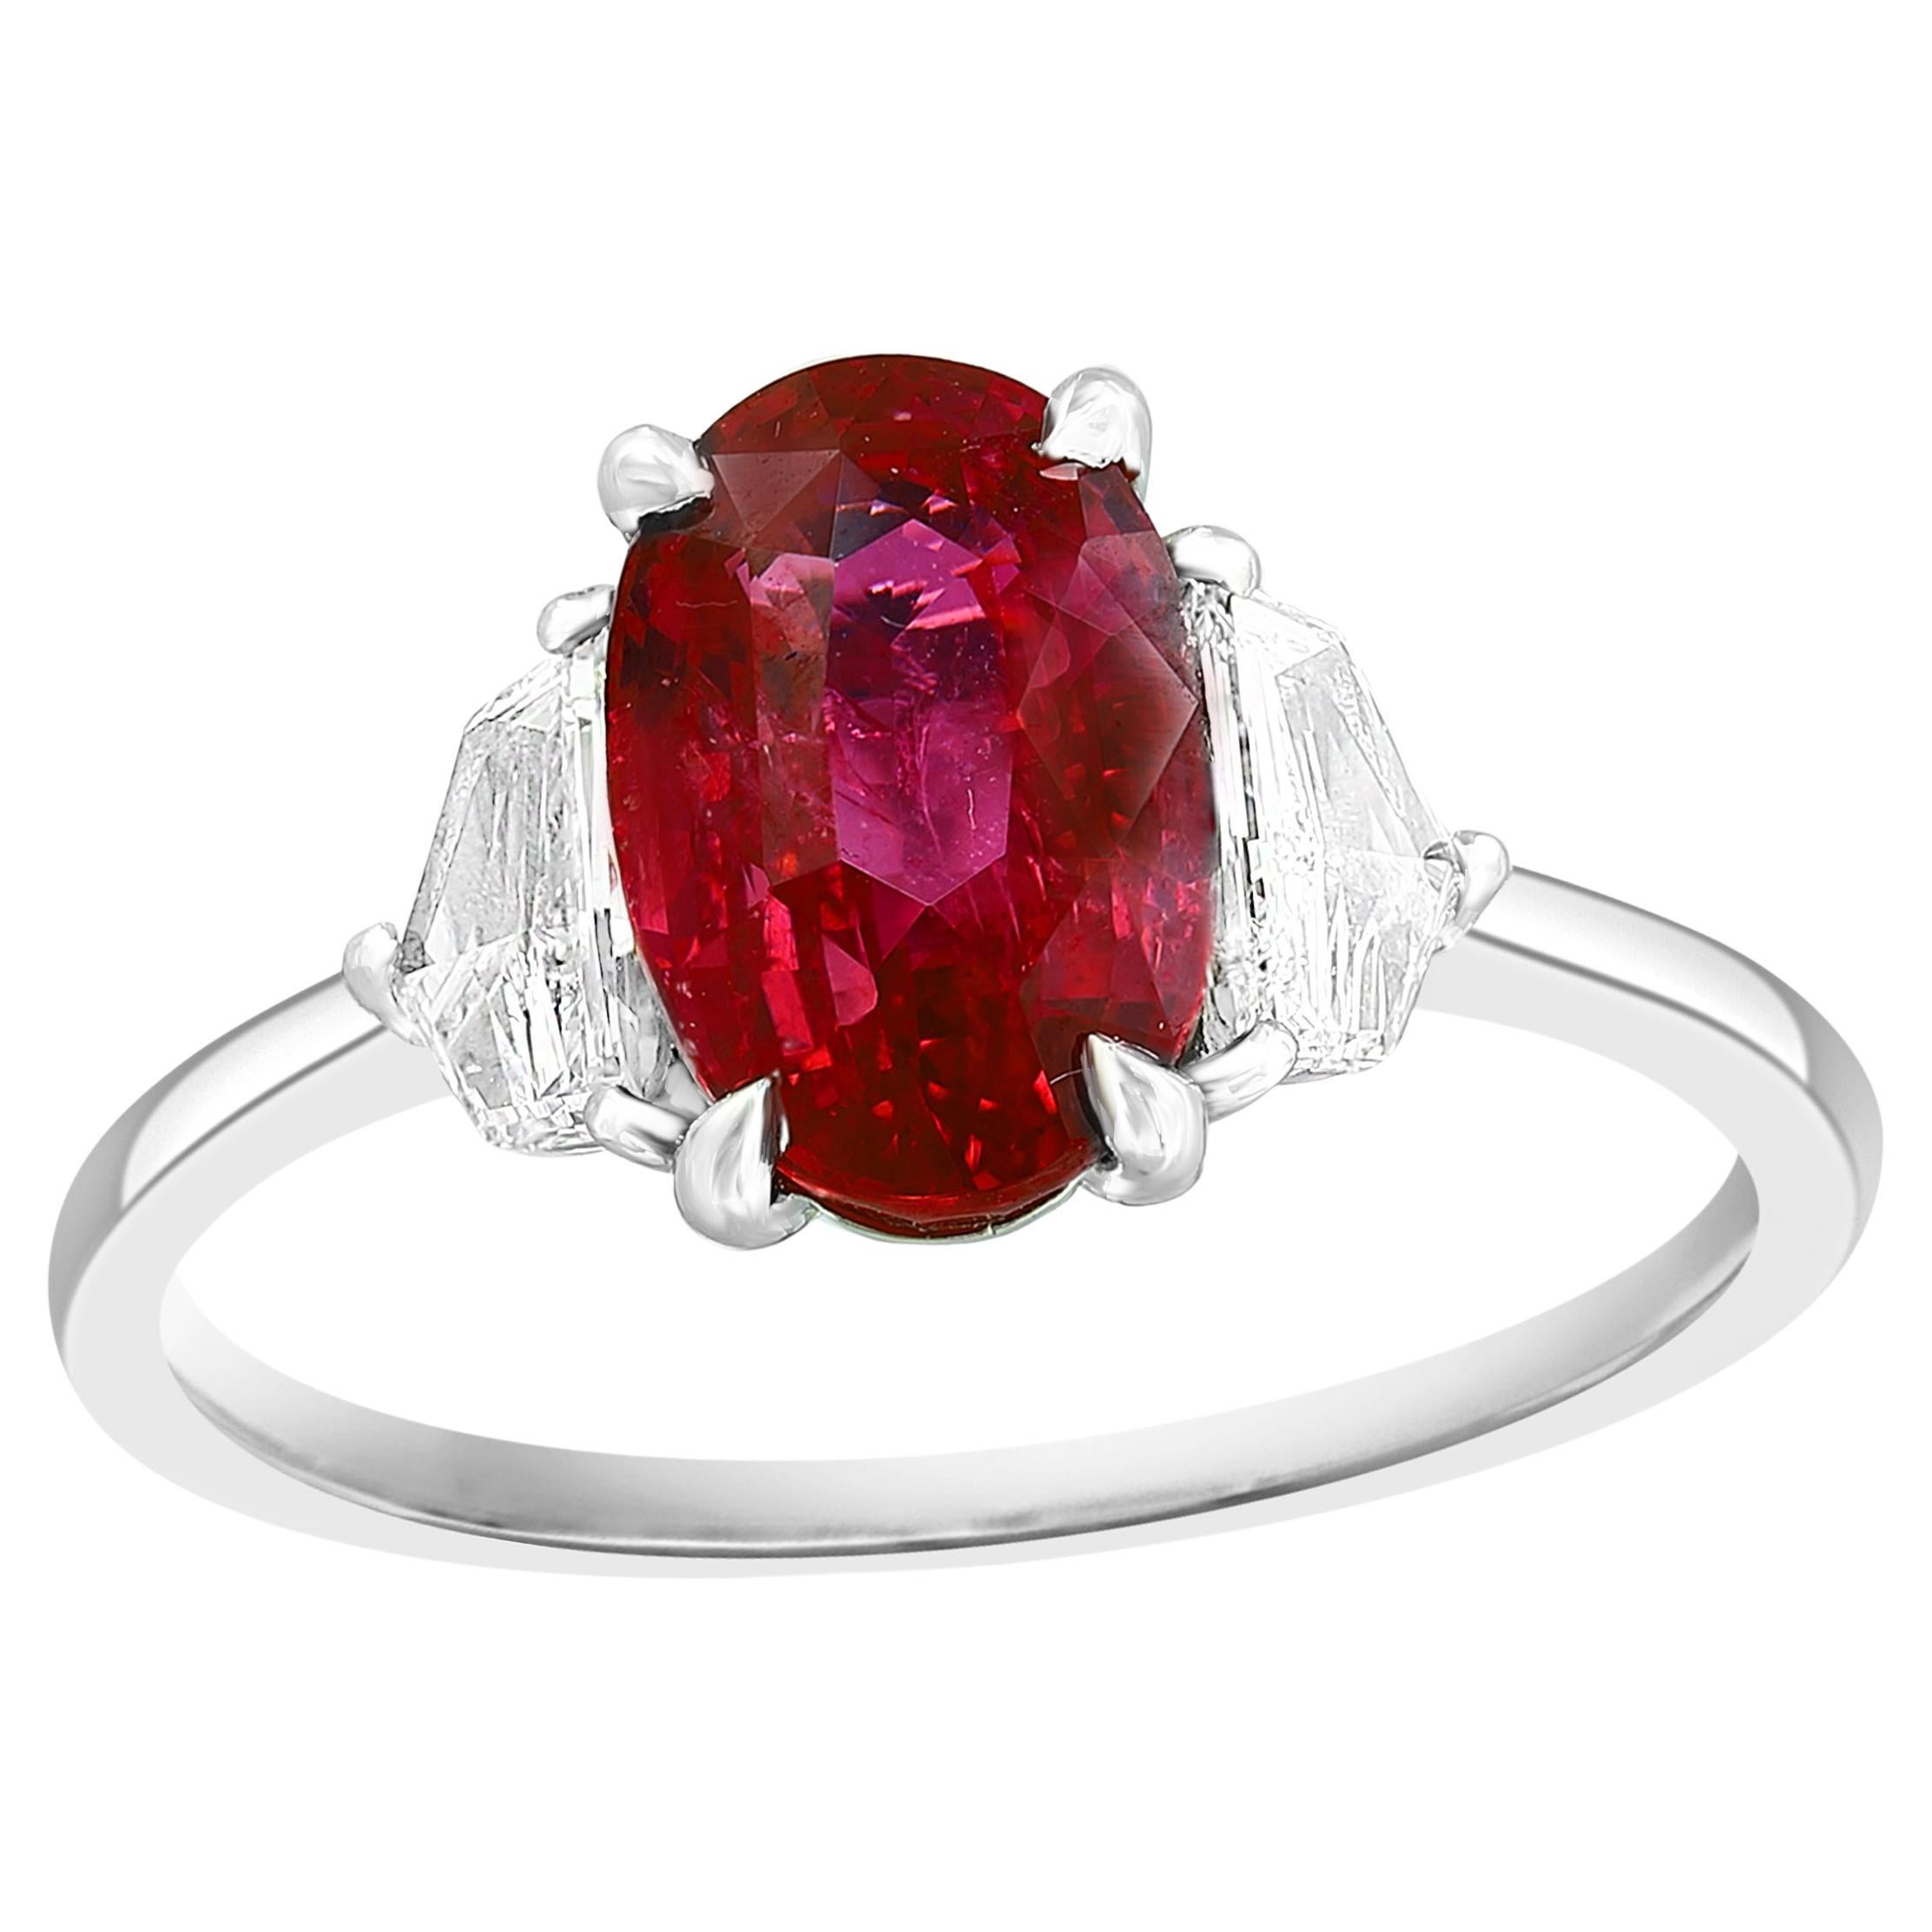 Certified 3.06 Carat Oval Cut Ruby and Diamond Engagement Ring in Platinum For Sale